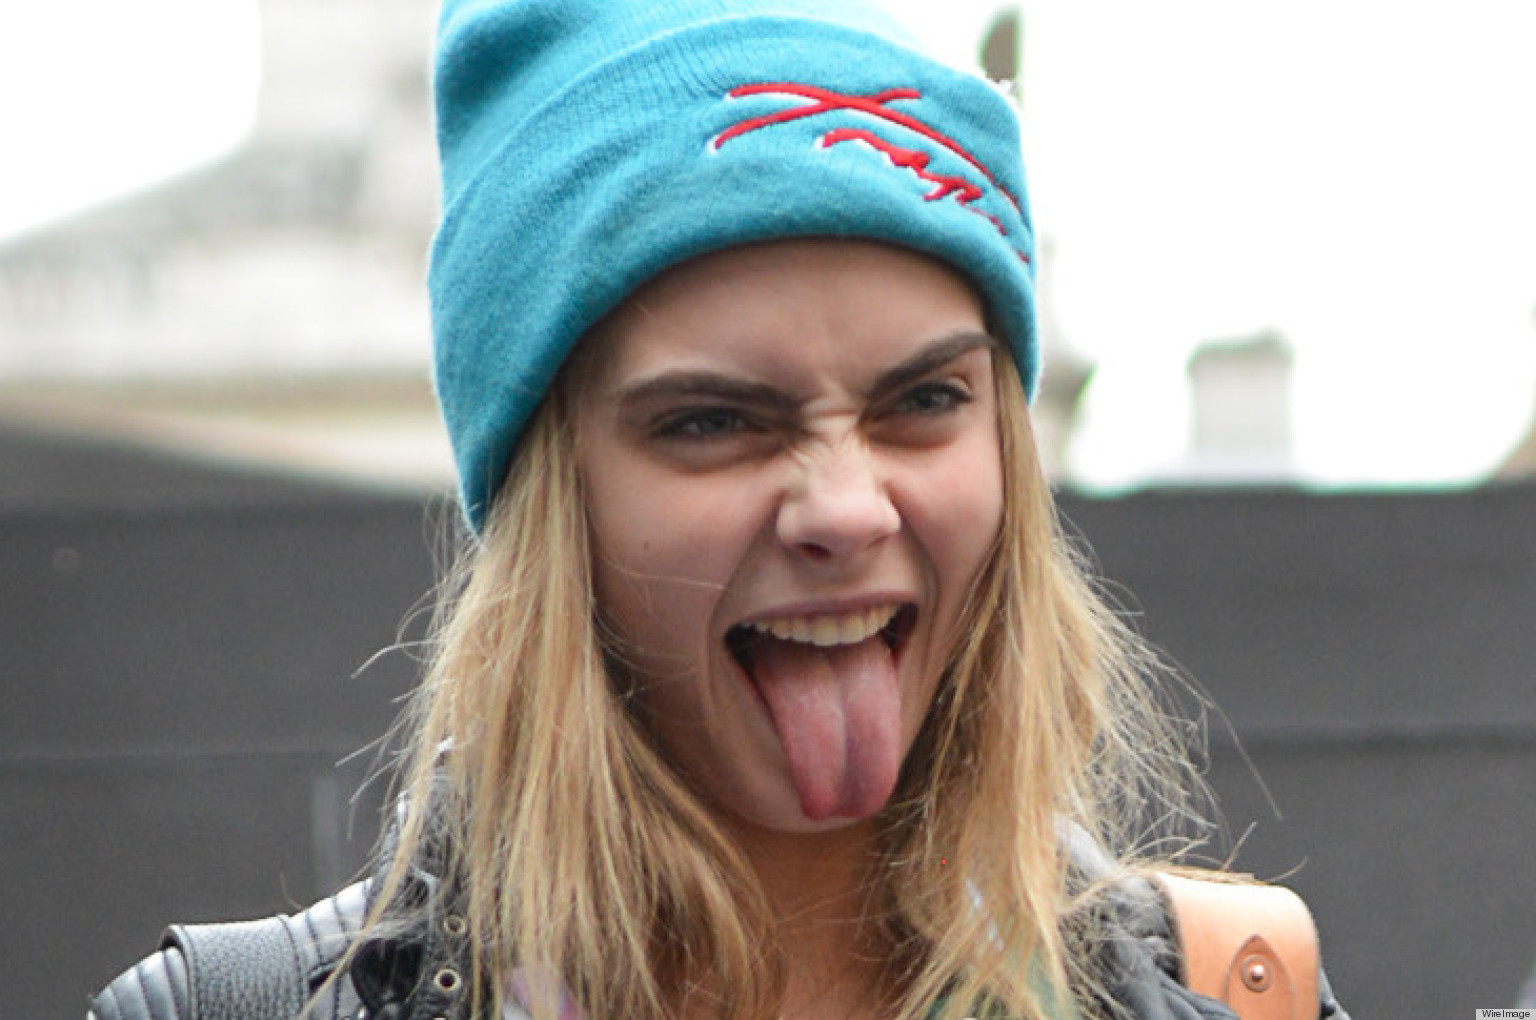 Models Making Funny, Weird And Silly Faces (PHOTOS) | HuffPost